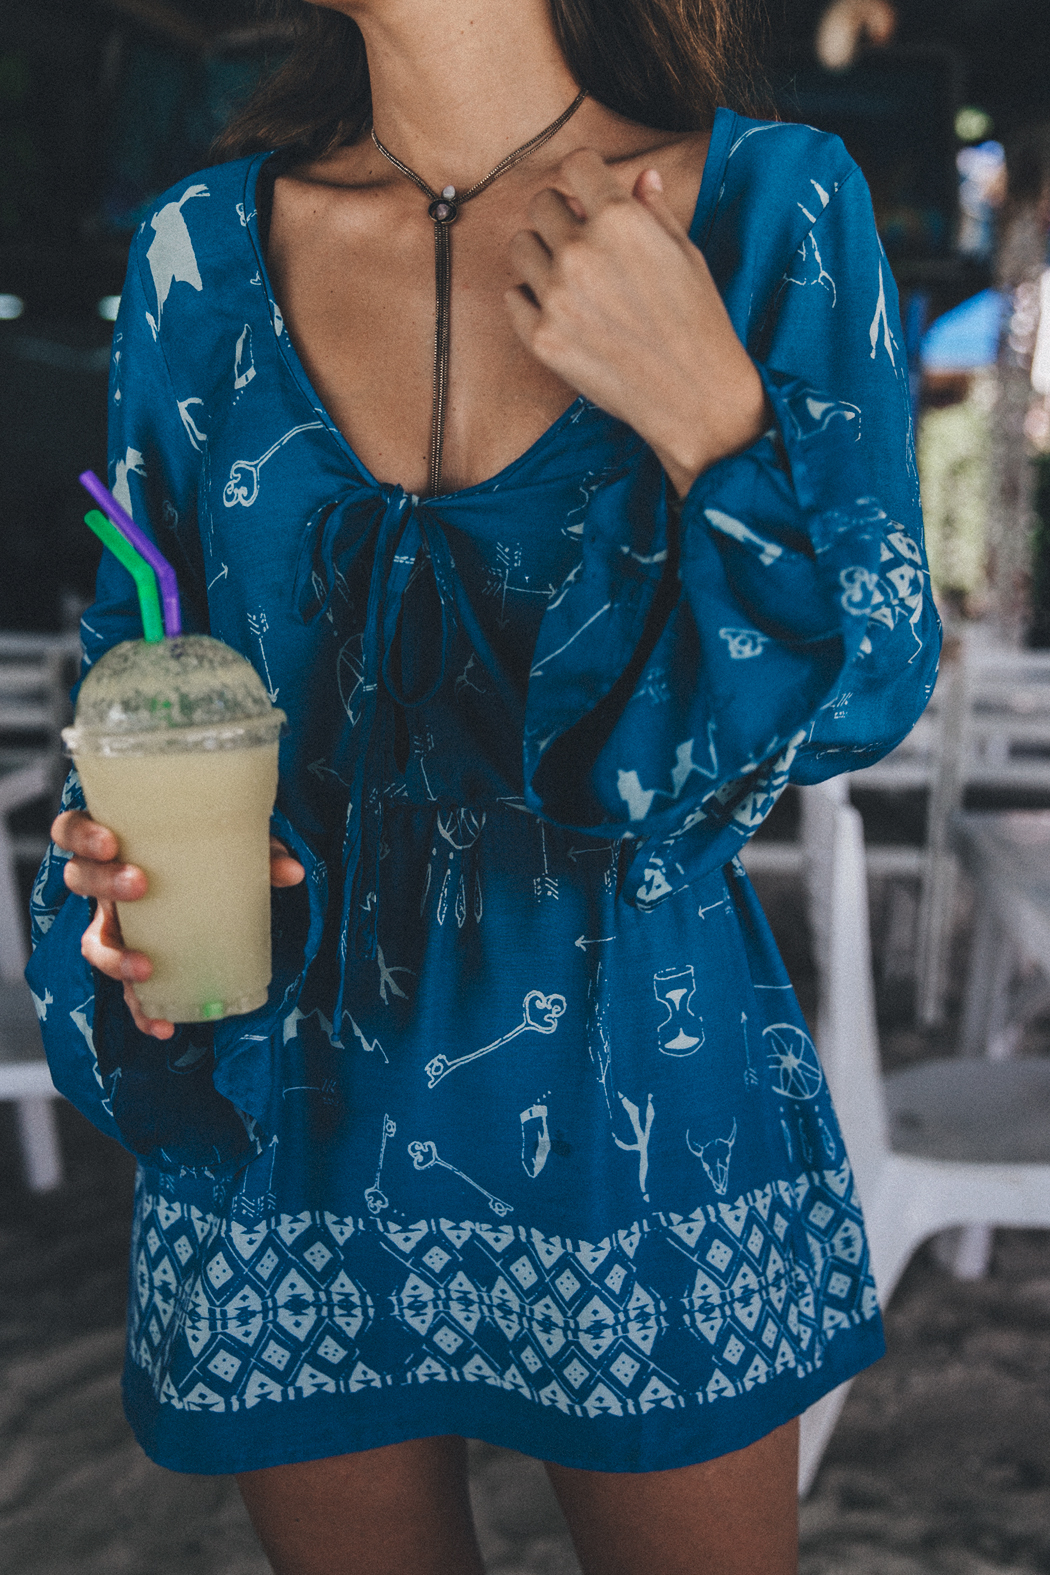 Bohemian_Bones_Dress-Revolve_Clothing-Layering_Necklace-Backpack-Thailand-Phi_Phi_Island-Summer_Look-Outfit-Beach-35